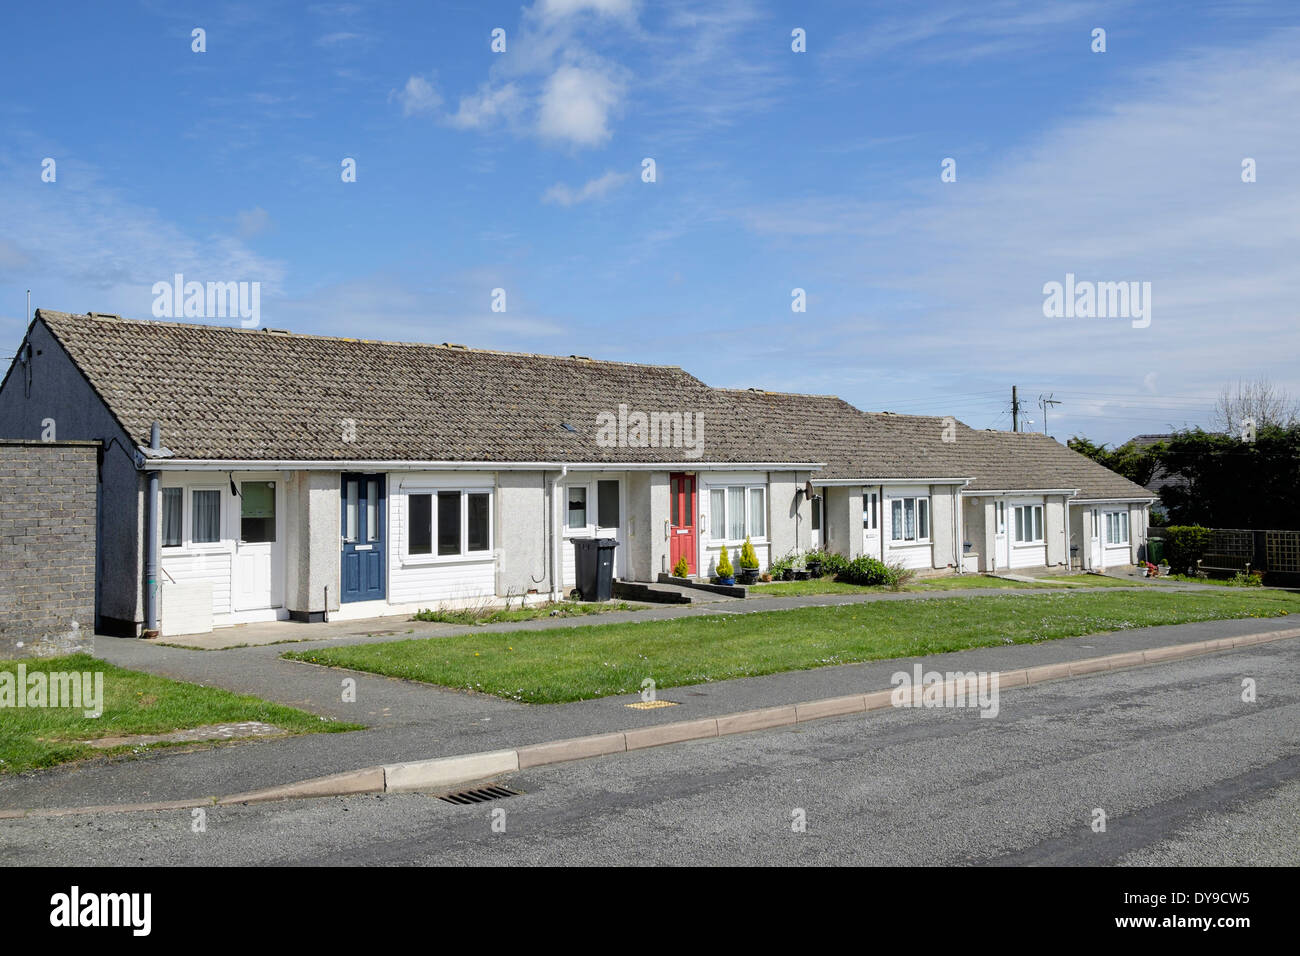 Small terraced bungalows providing sheltered retirement Council homes for old folks. Benllech, Isle of Anglesey, North Wales, UK Stock Photo